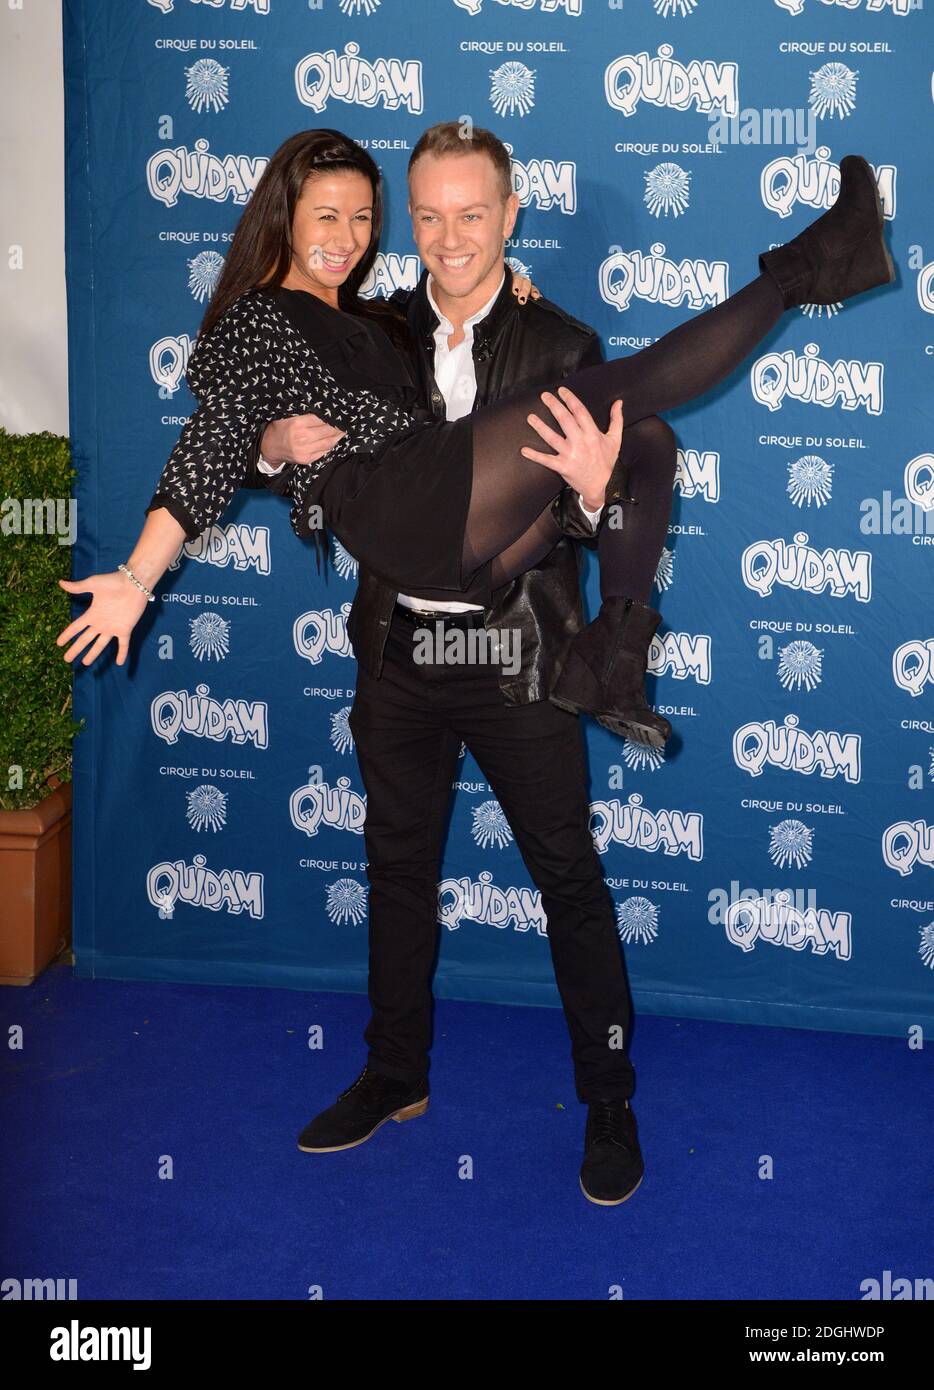 Hayley Tamaddon and her Dancing on Ice partner Daniel Whiston arriving at the opening night of Cirque du Soleil's Quidam at the Royal Albert Hall, London. Stock Photo